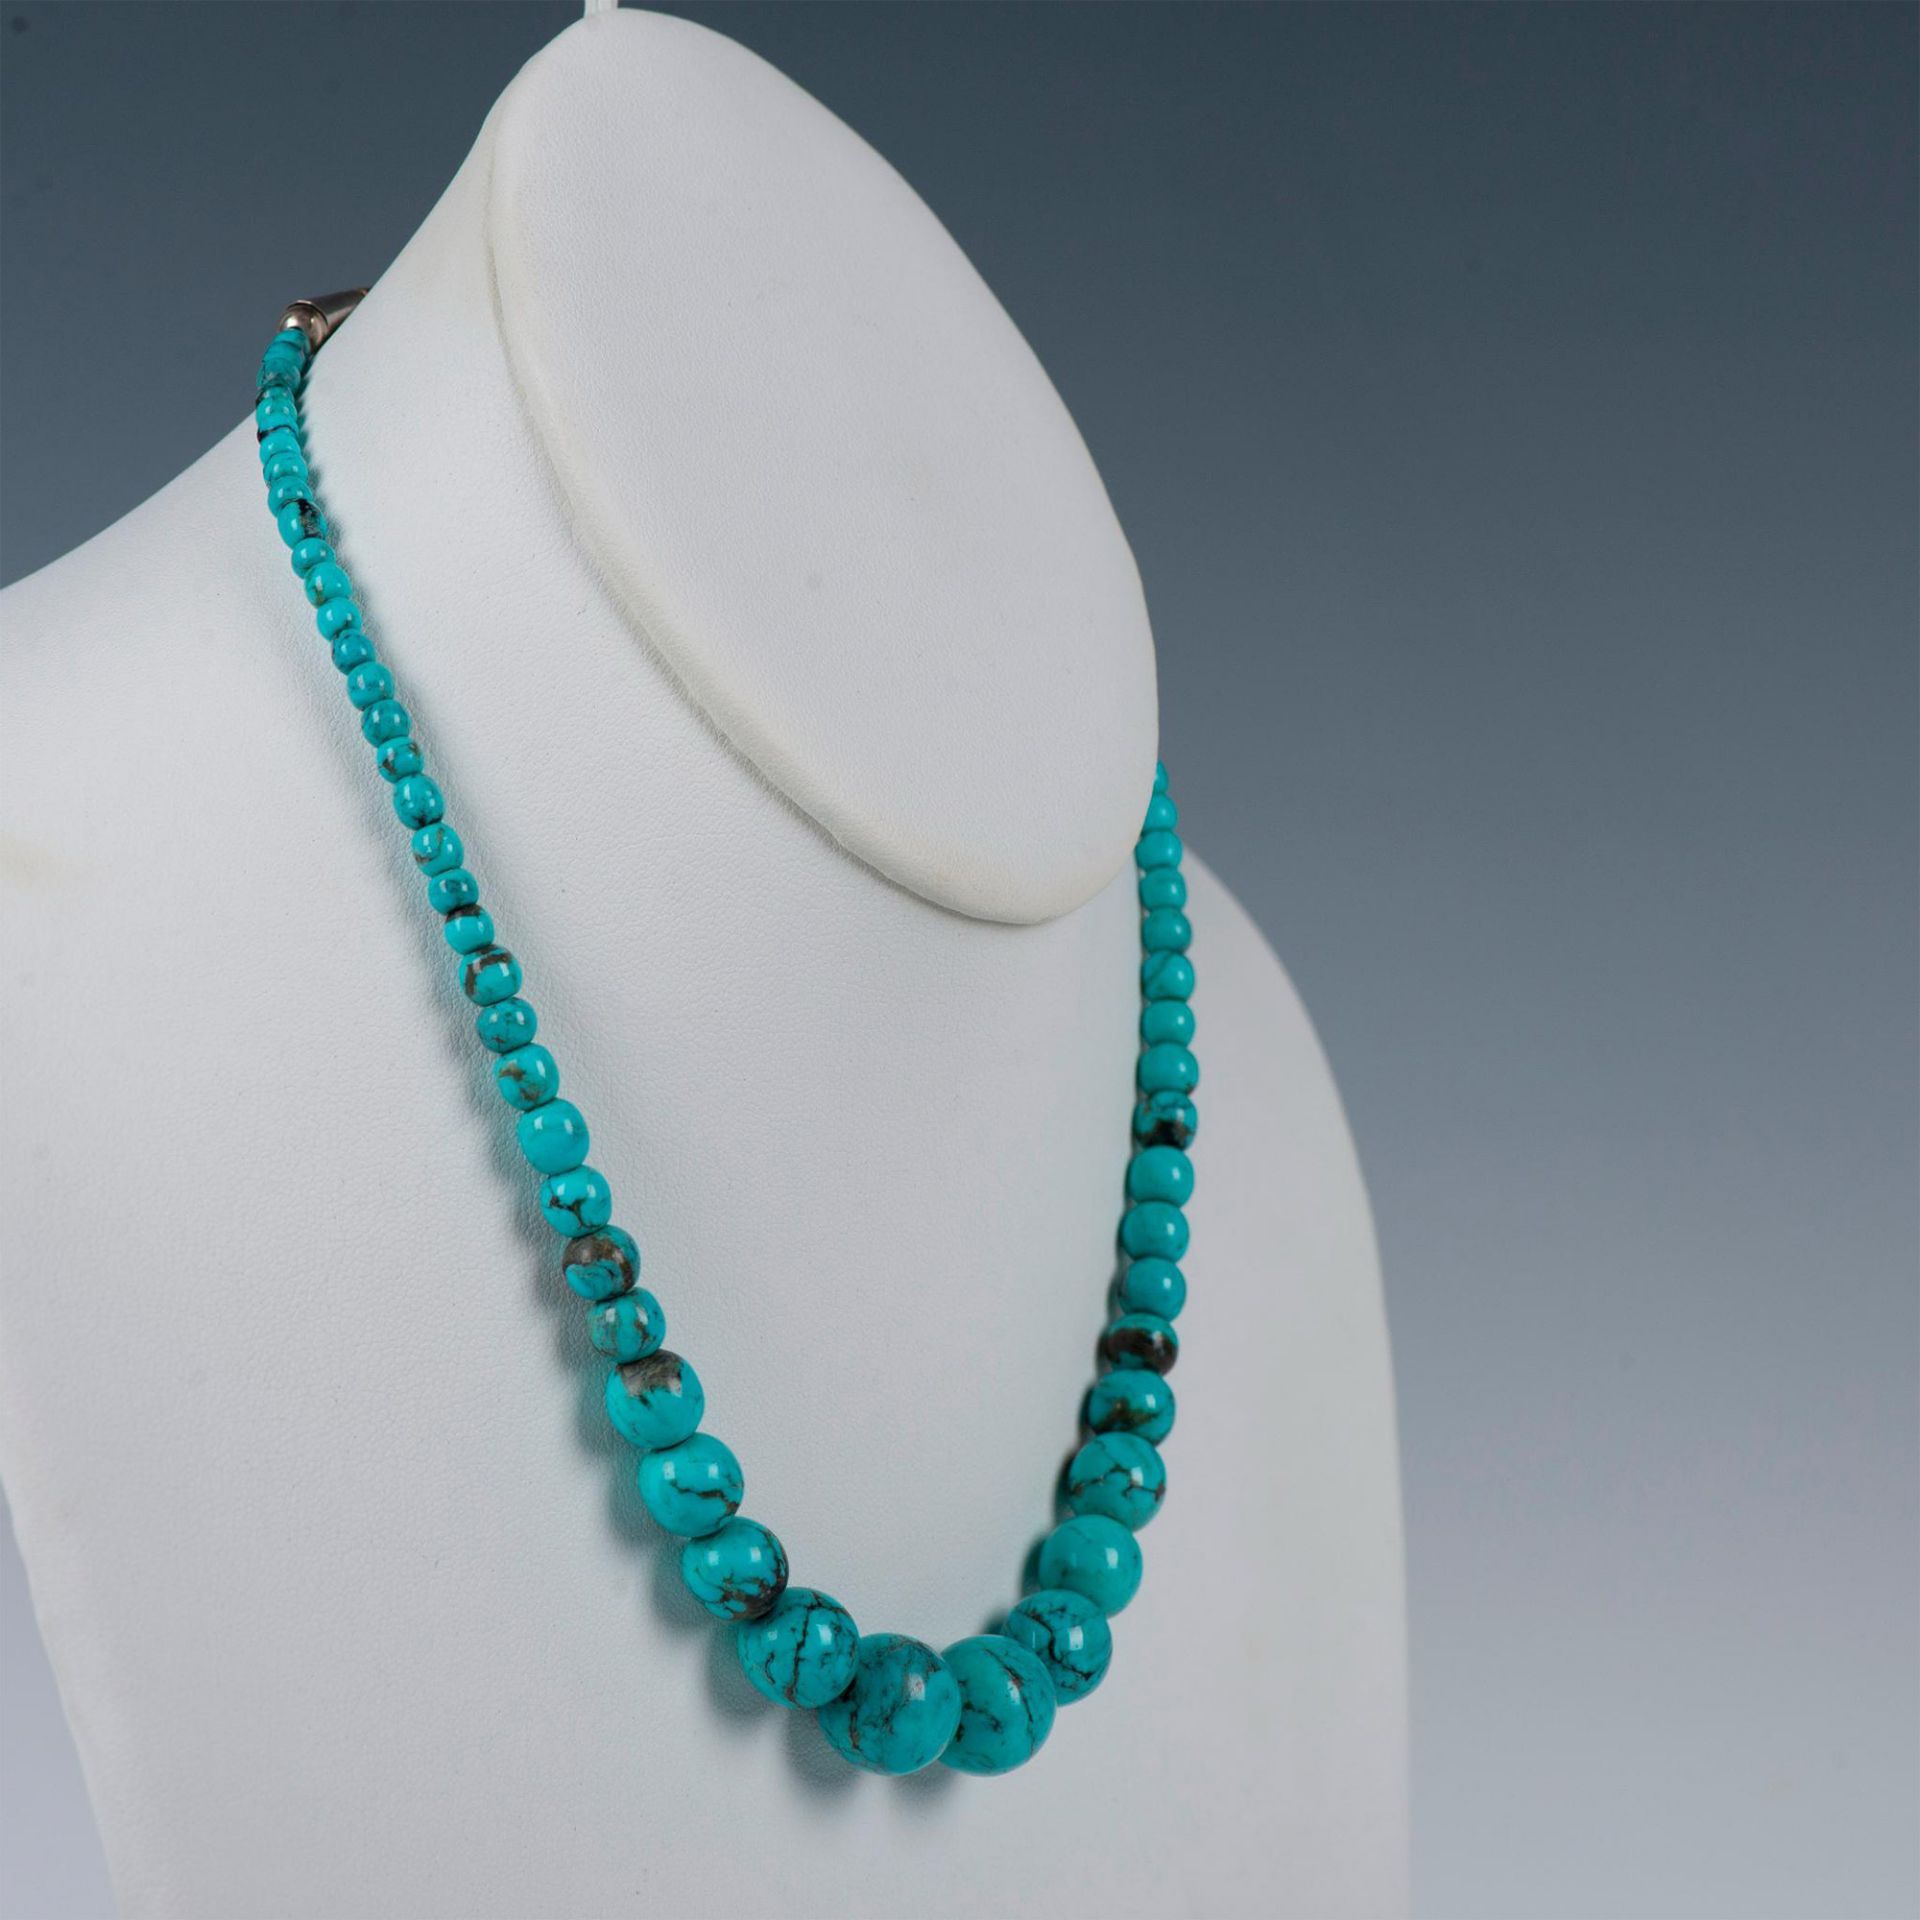 Turquoise Bead and Sterling Silver Necklace - Image 2 of 4